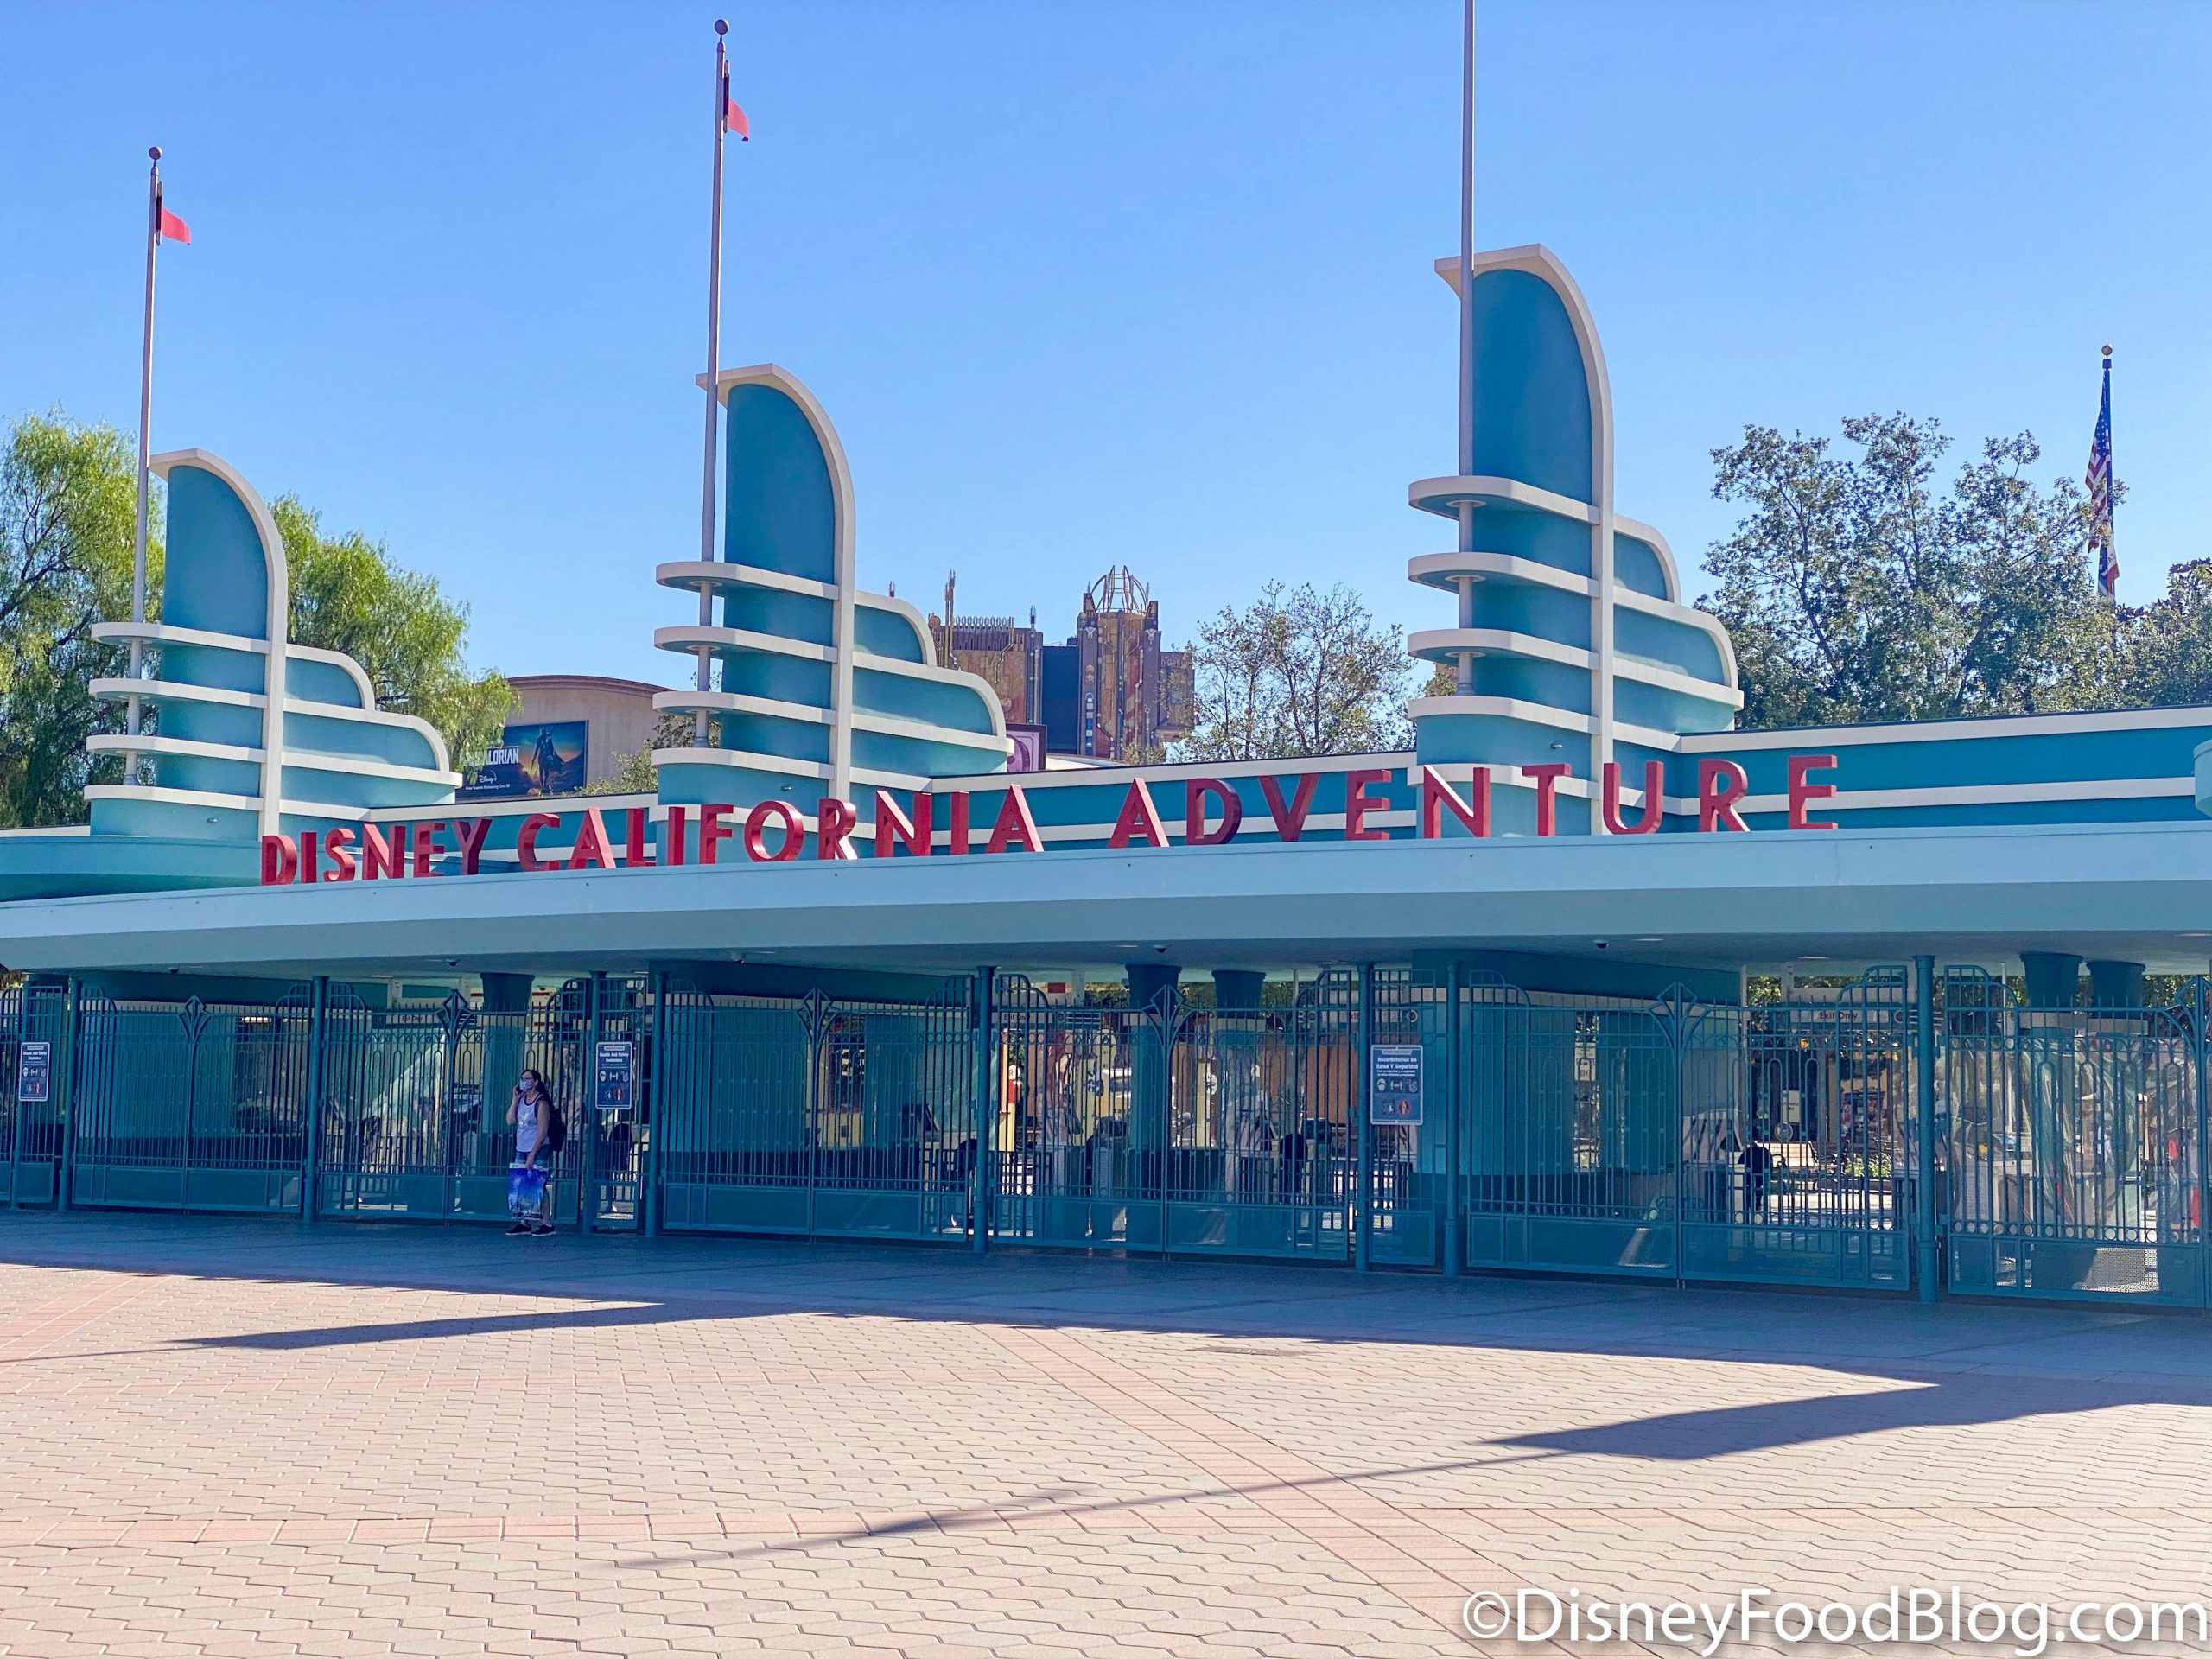 Disneyland Resort simplifies process for tickets and theme park reservations